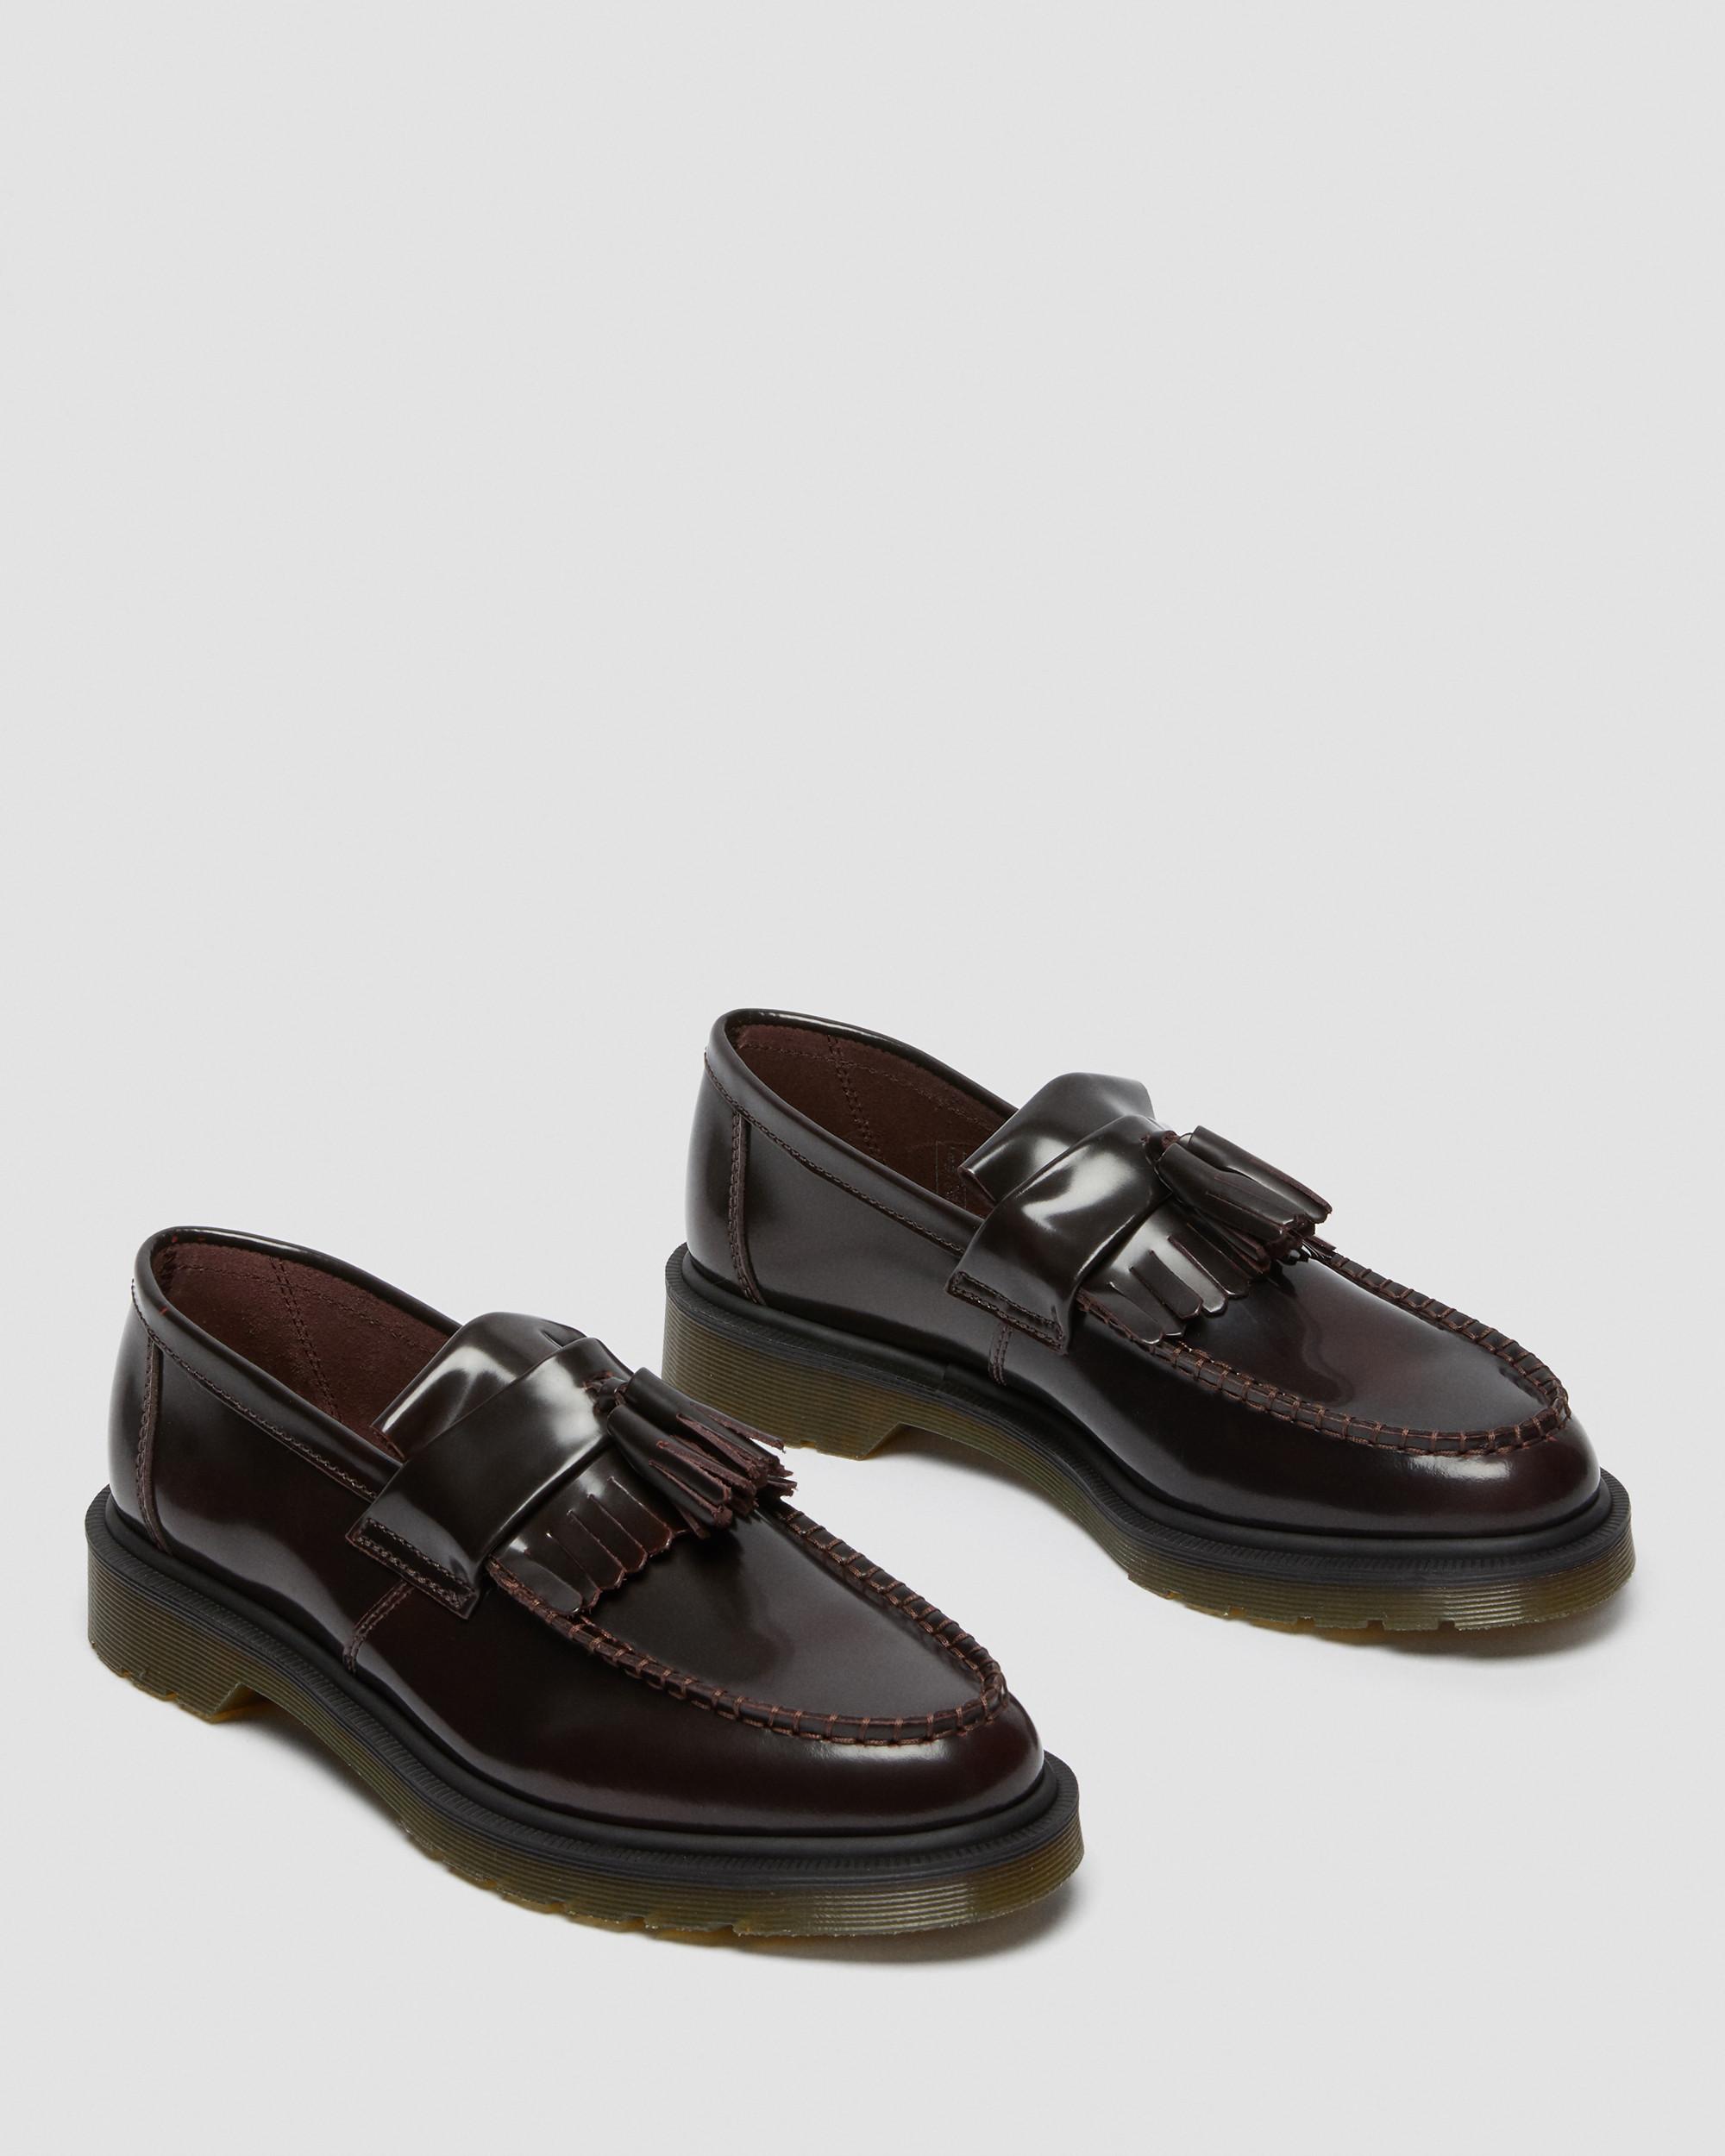 adrian arcadia loafers